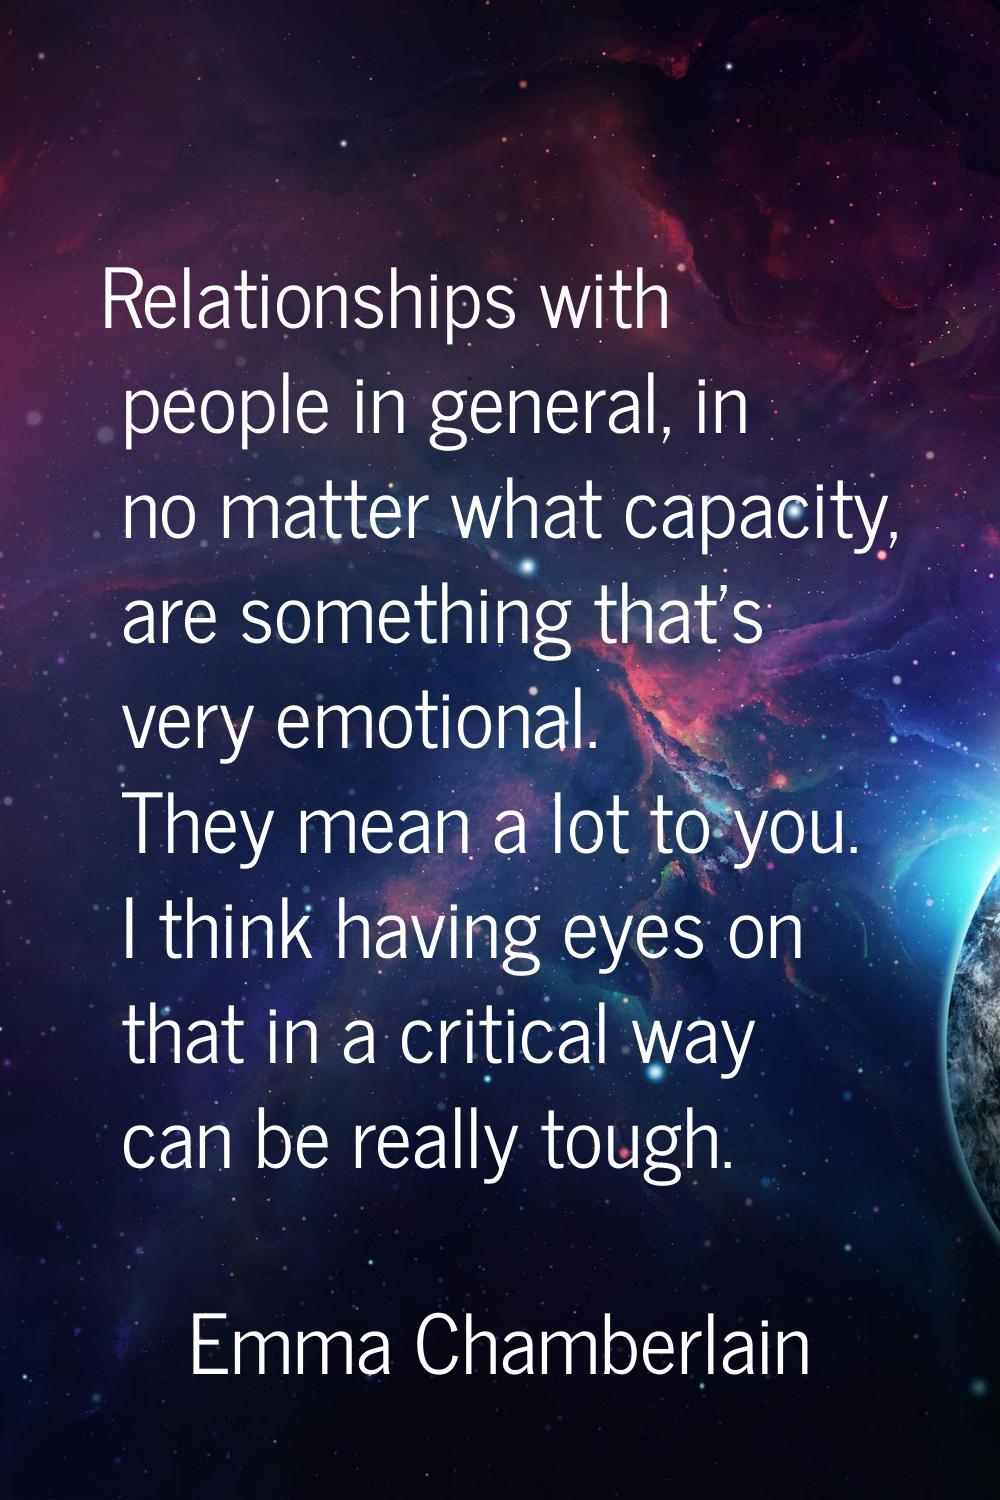 Relationships with people in general, in no matter what capacity, are something that’s very emotion